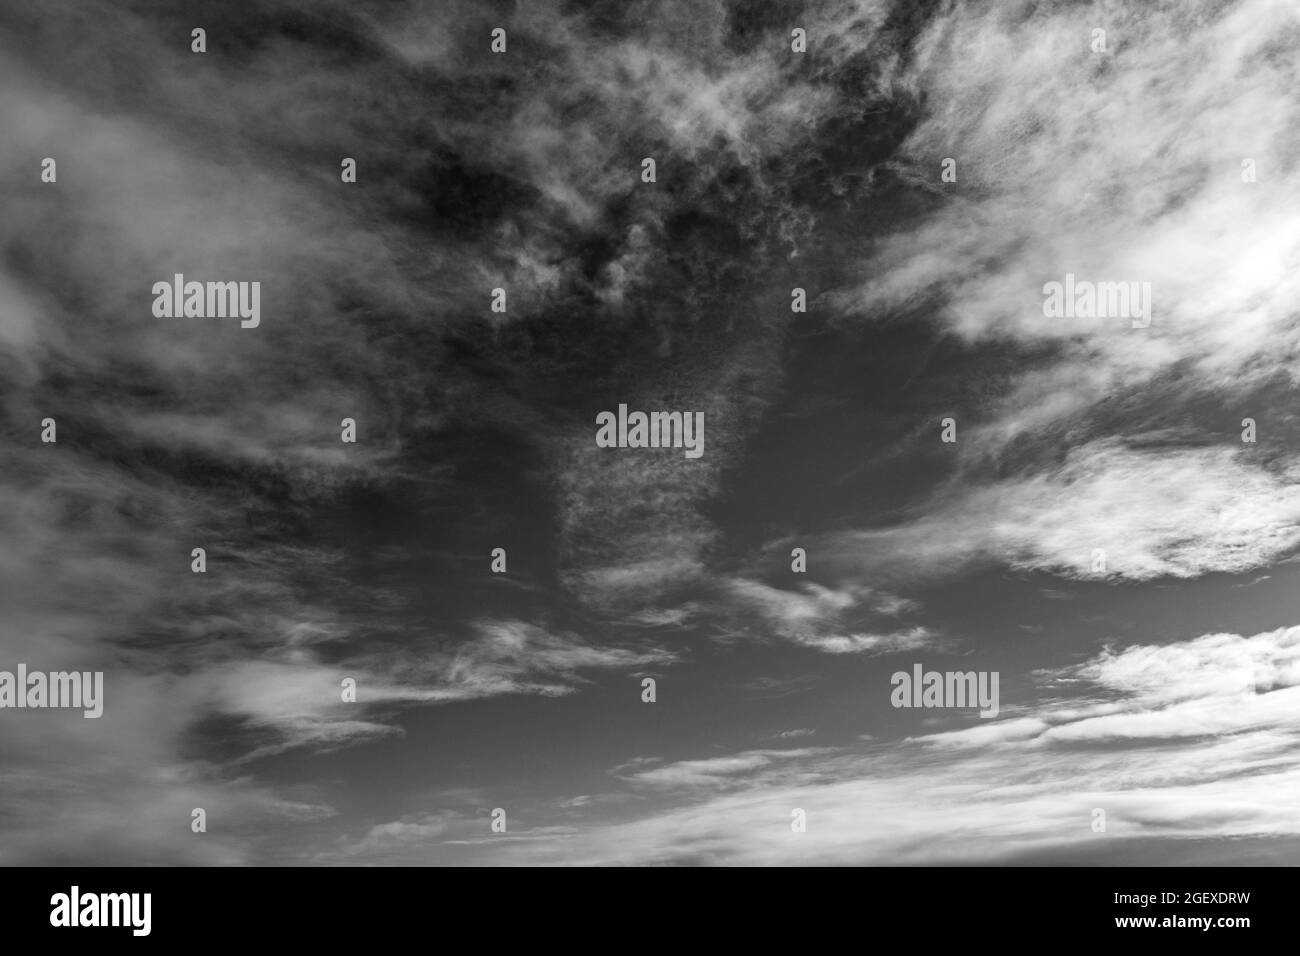 Sky landscape with black and white clouds seen from the Ponta do Humaitá pier. Salvador Bahia Brazil. Stock Photo